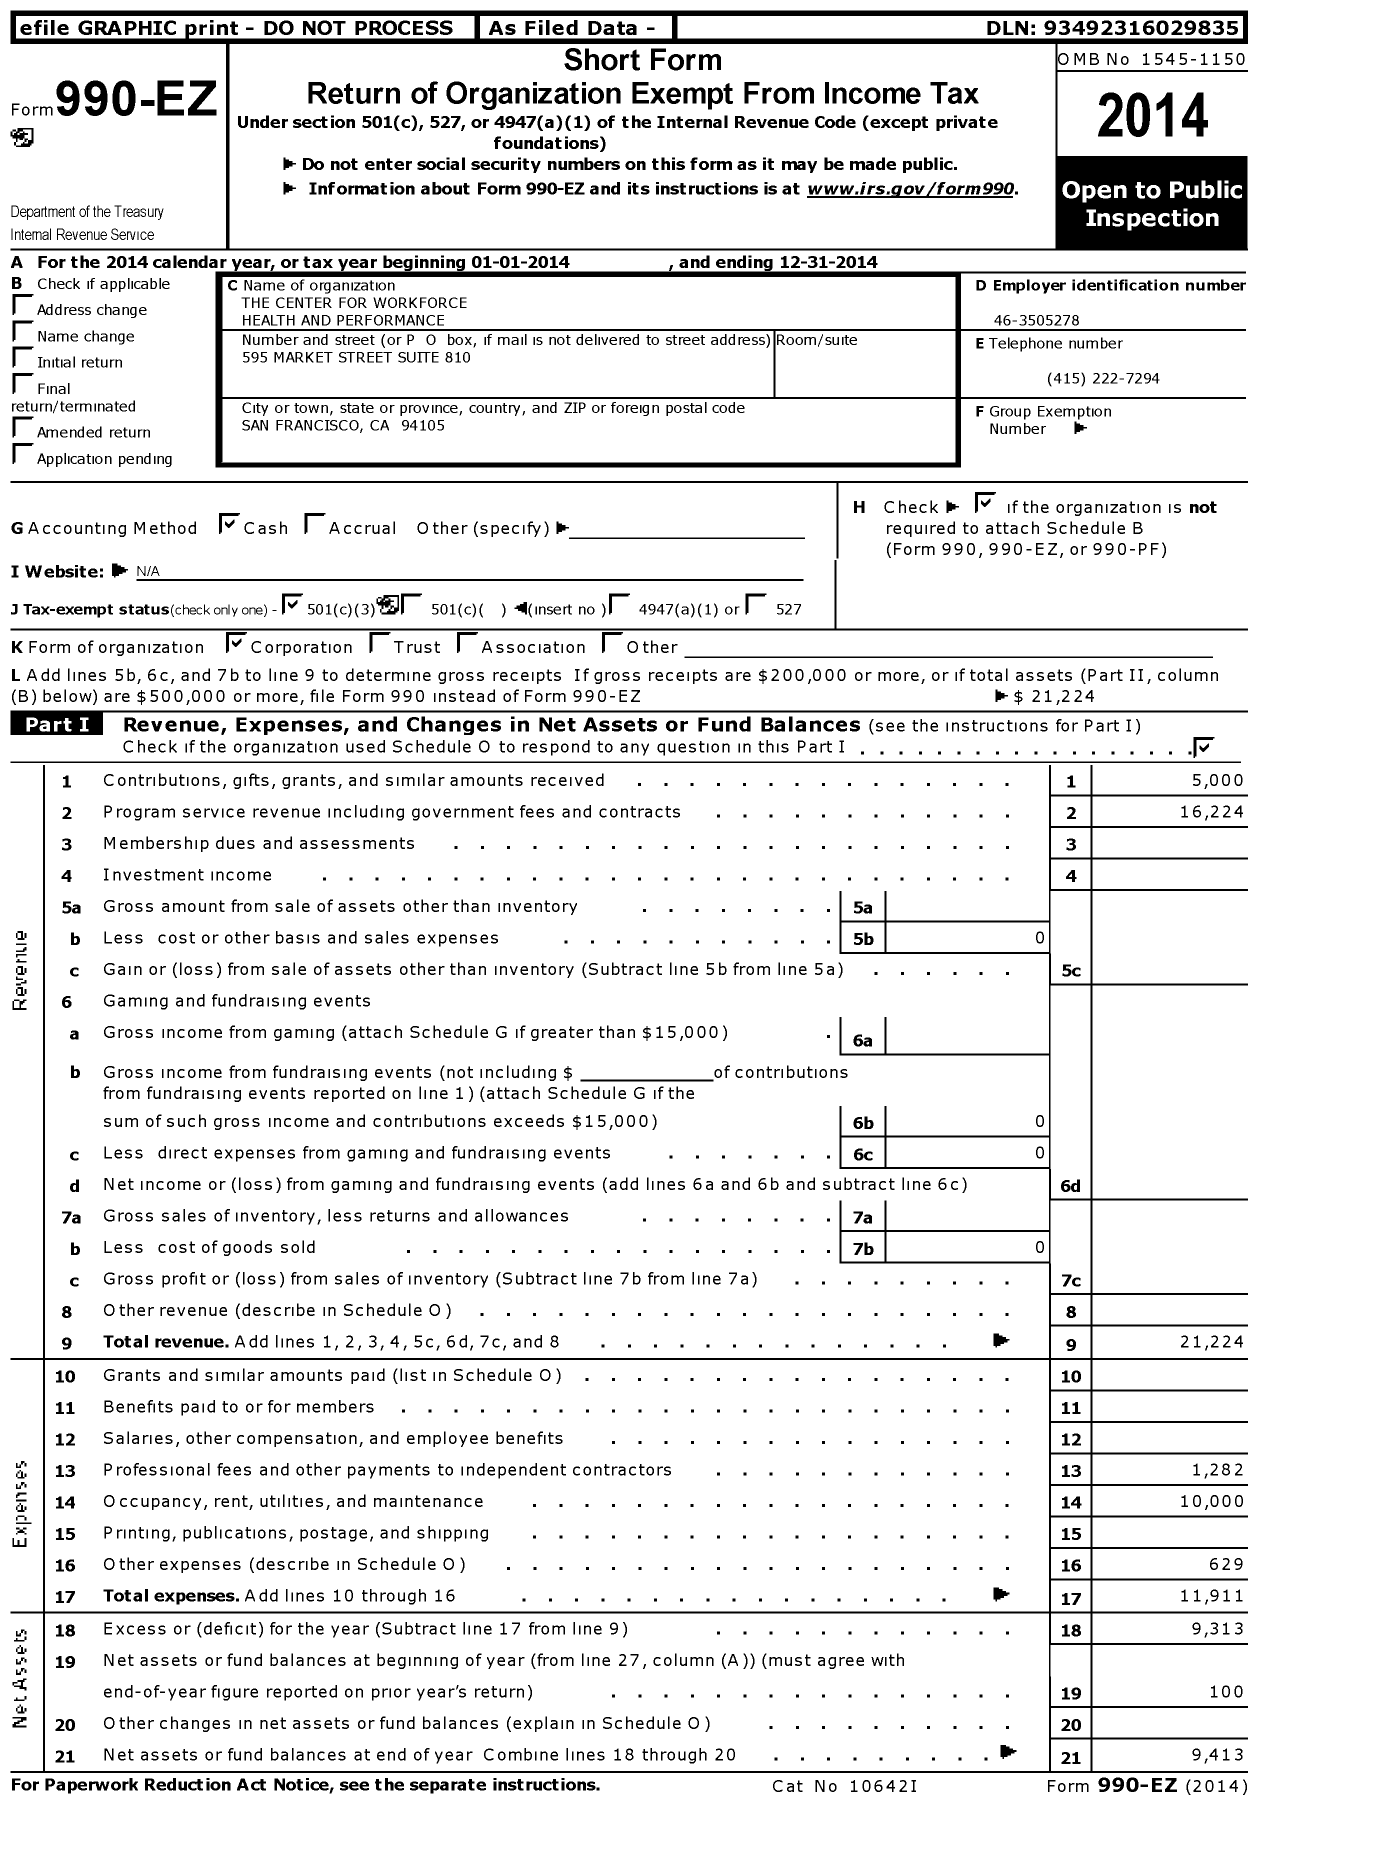 Image of first page of 2014 Form 990EZ for The Center for Workforce Health and Performance